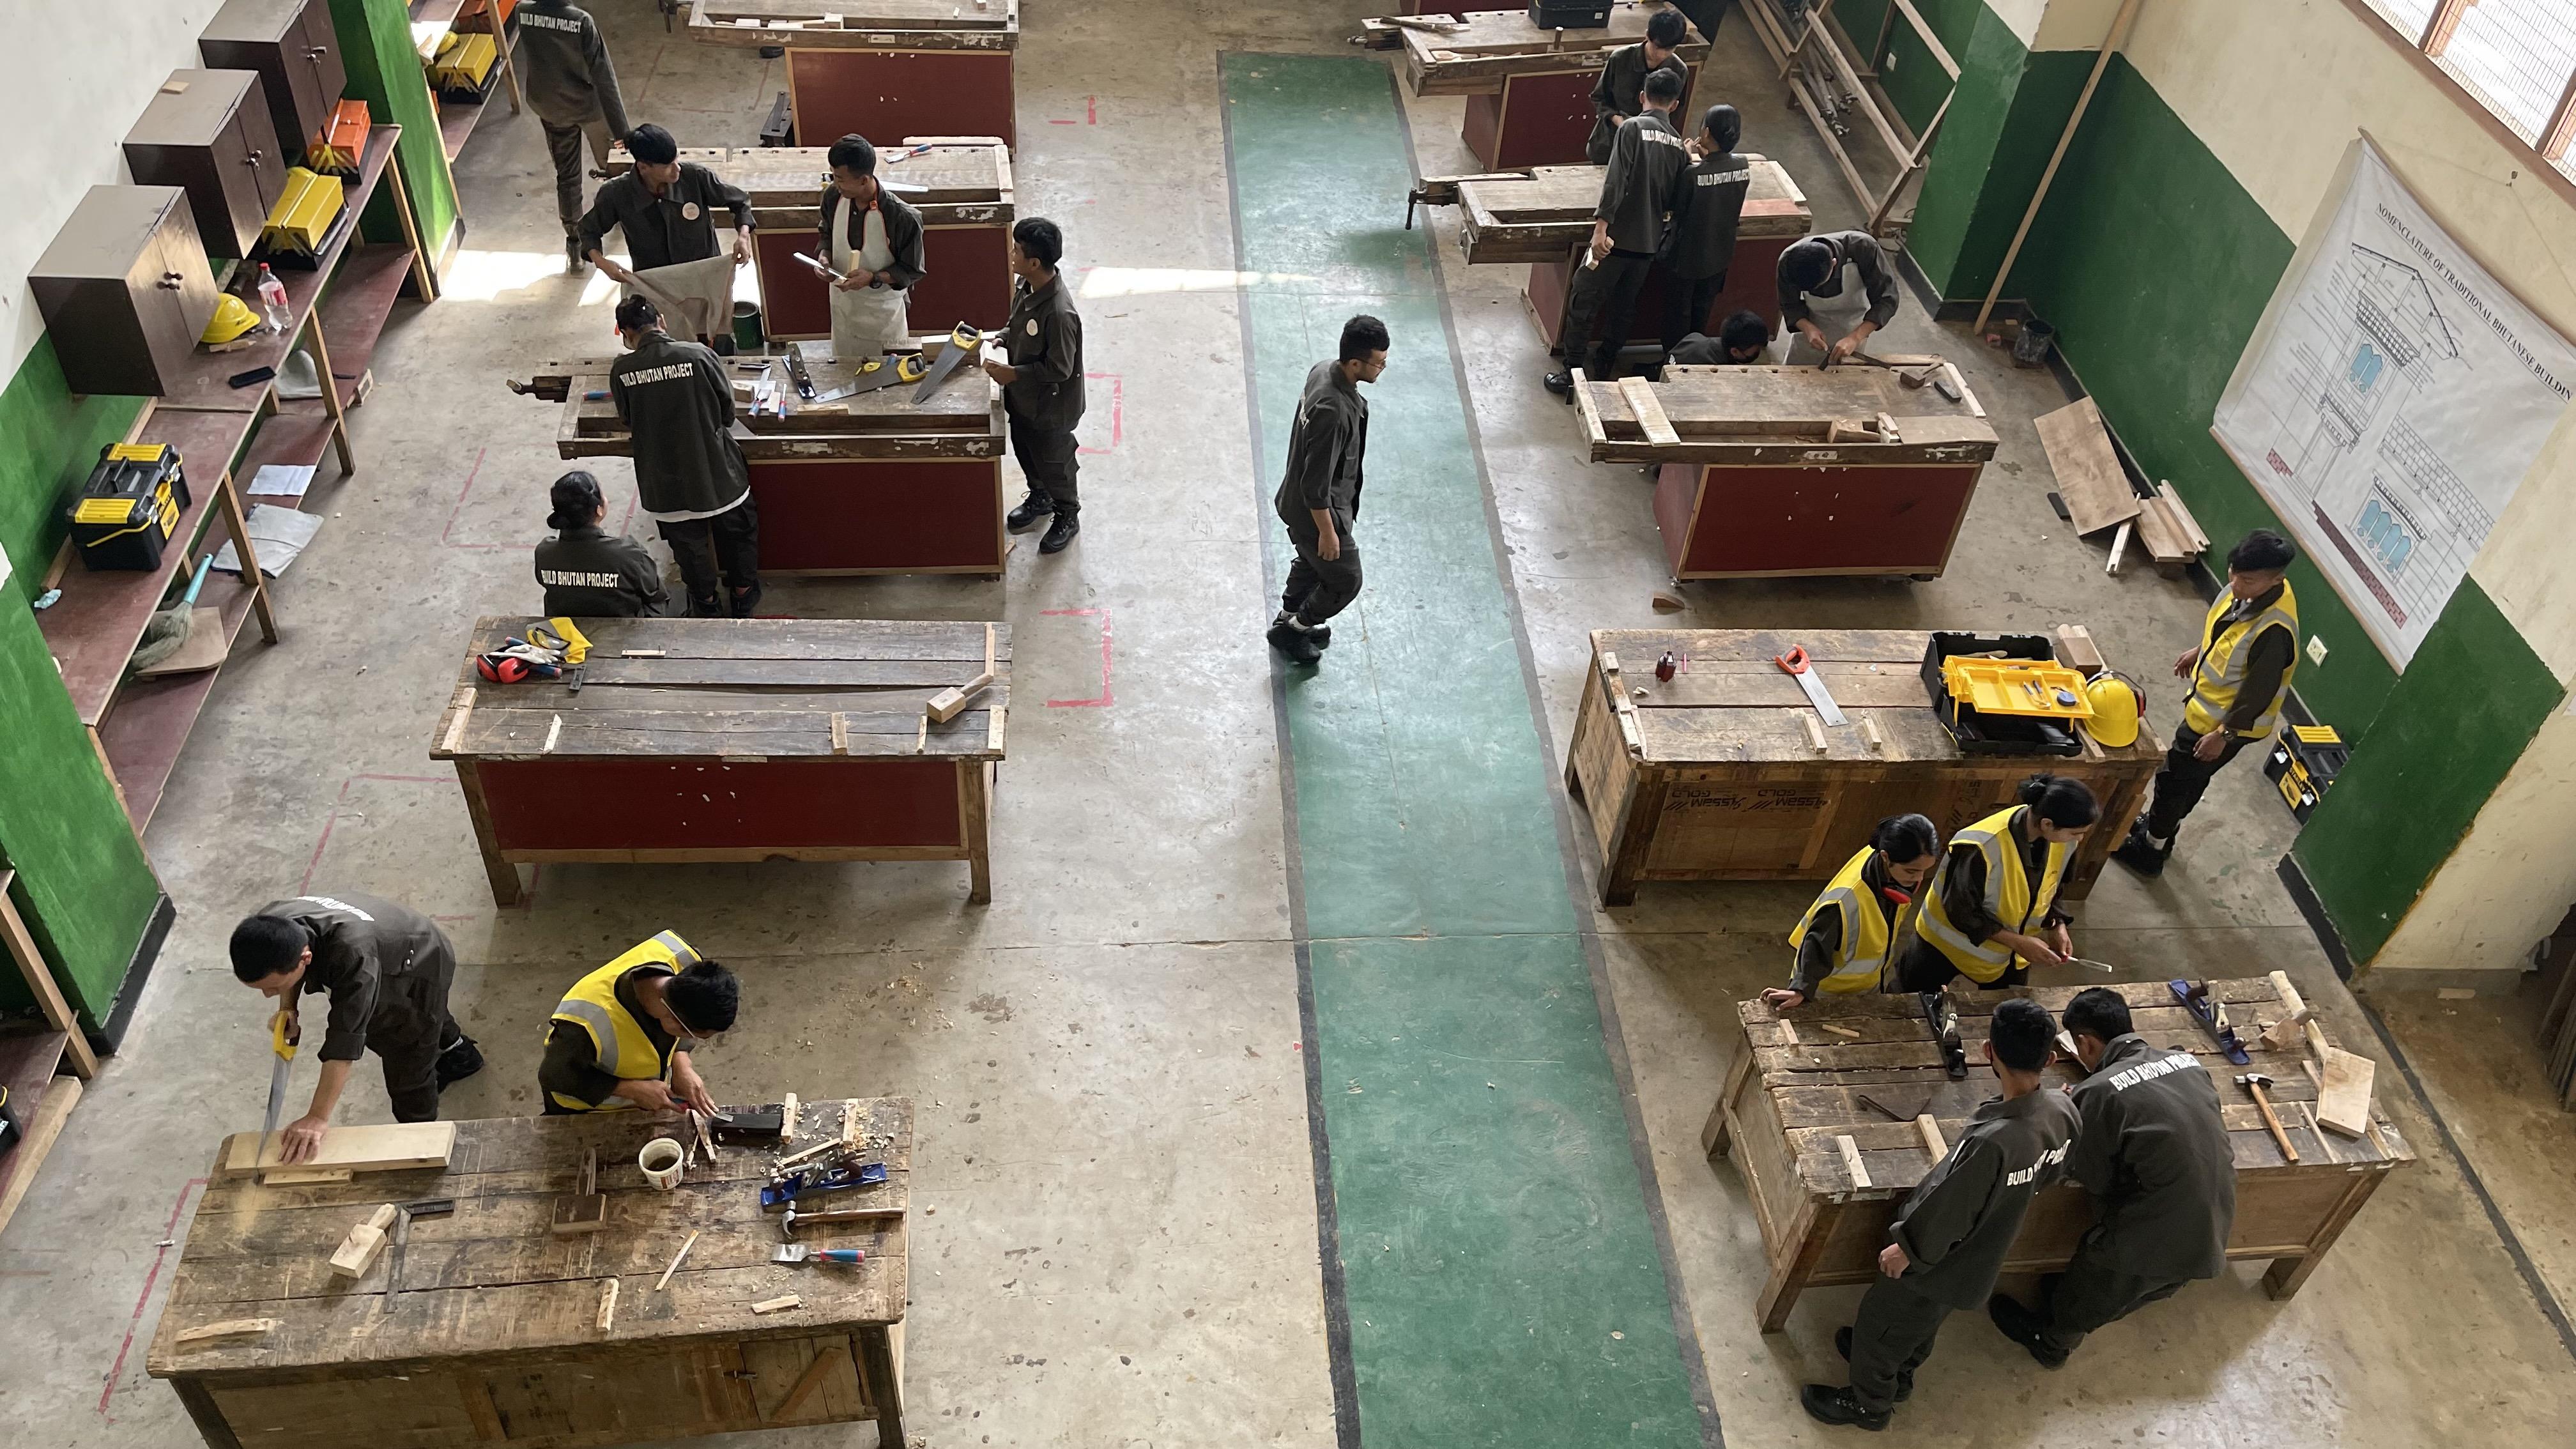 A series of tables in a room with tools and materials on them. People are working at the tables on projects.